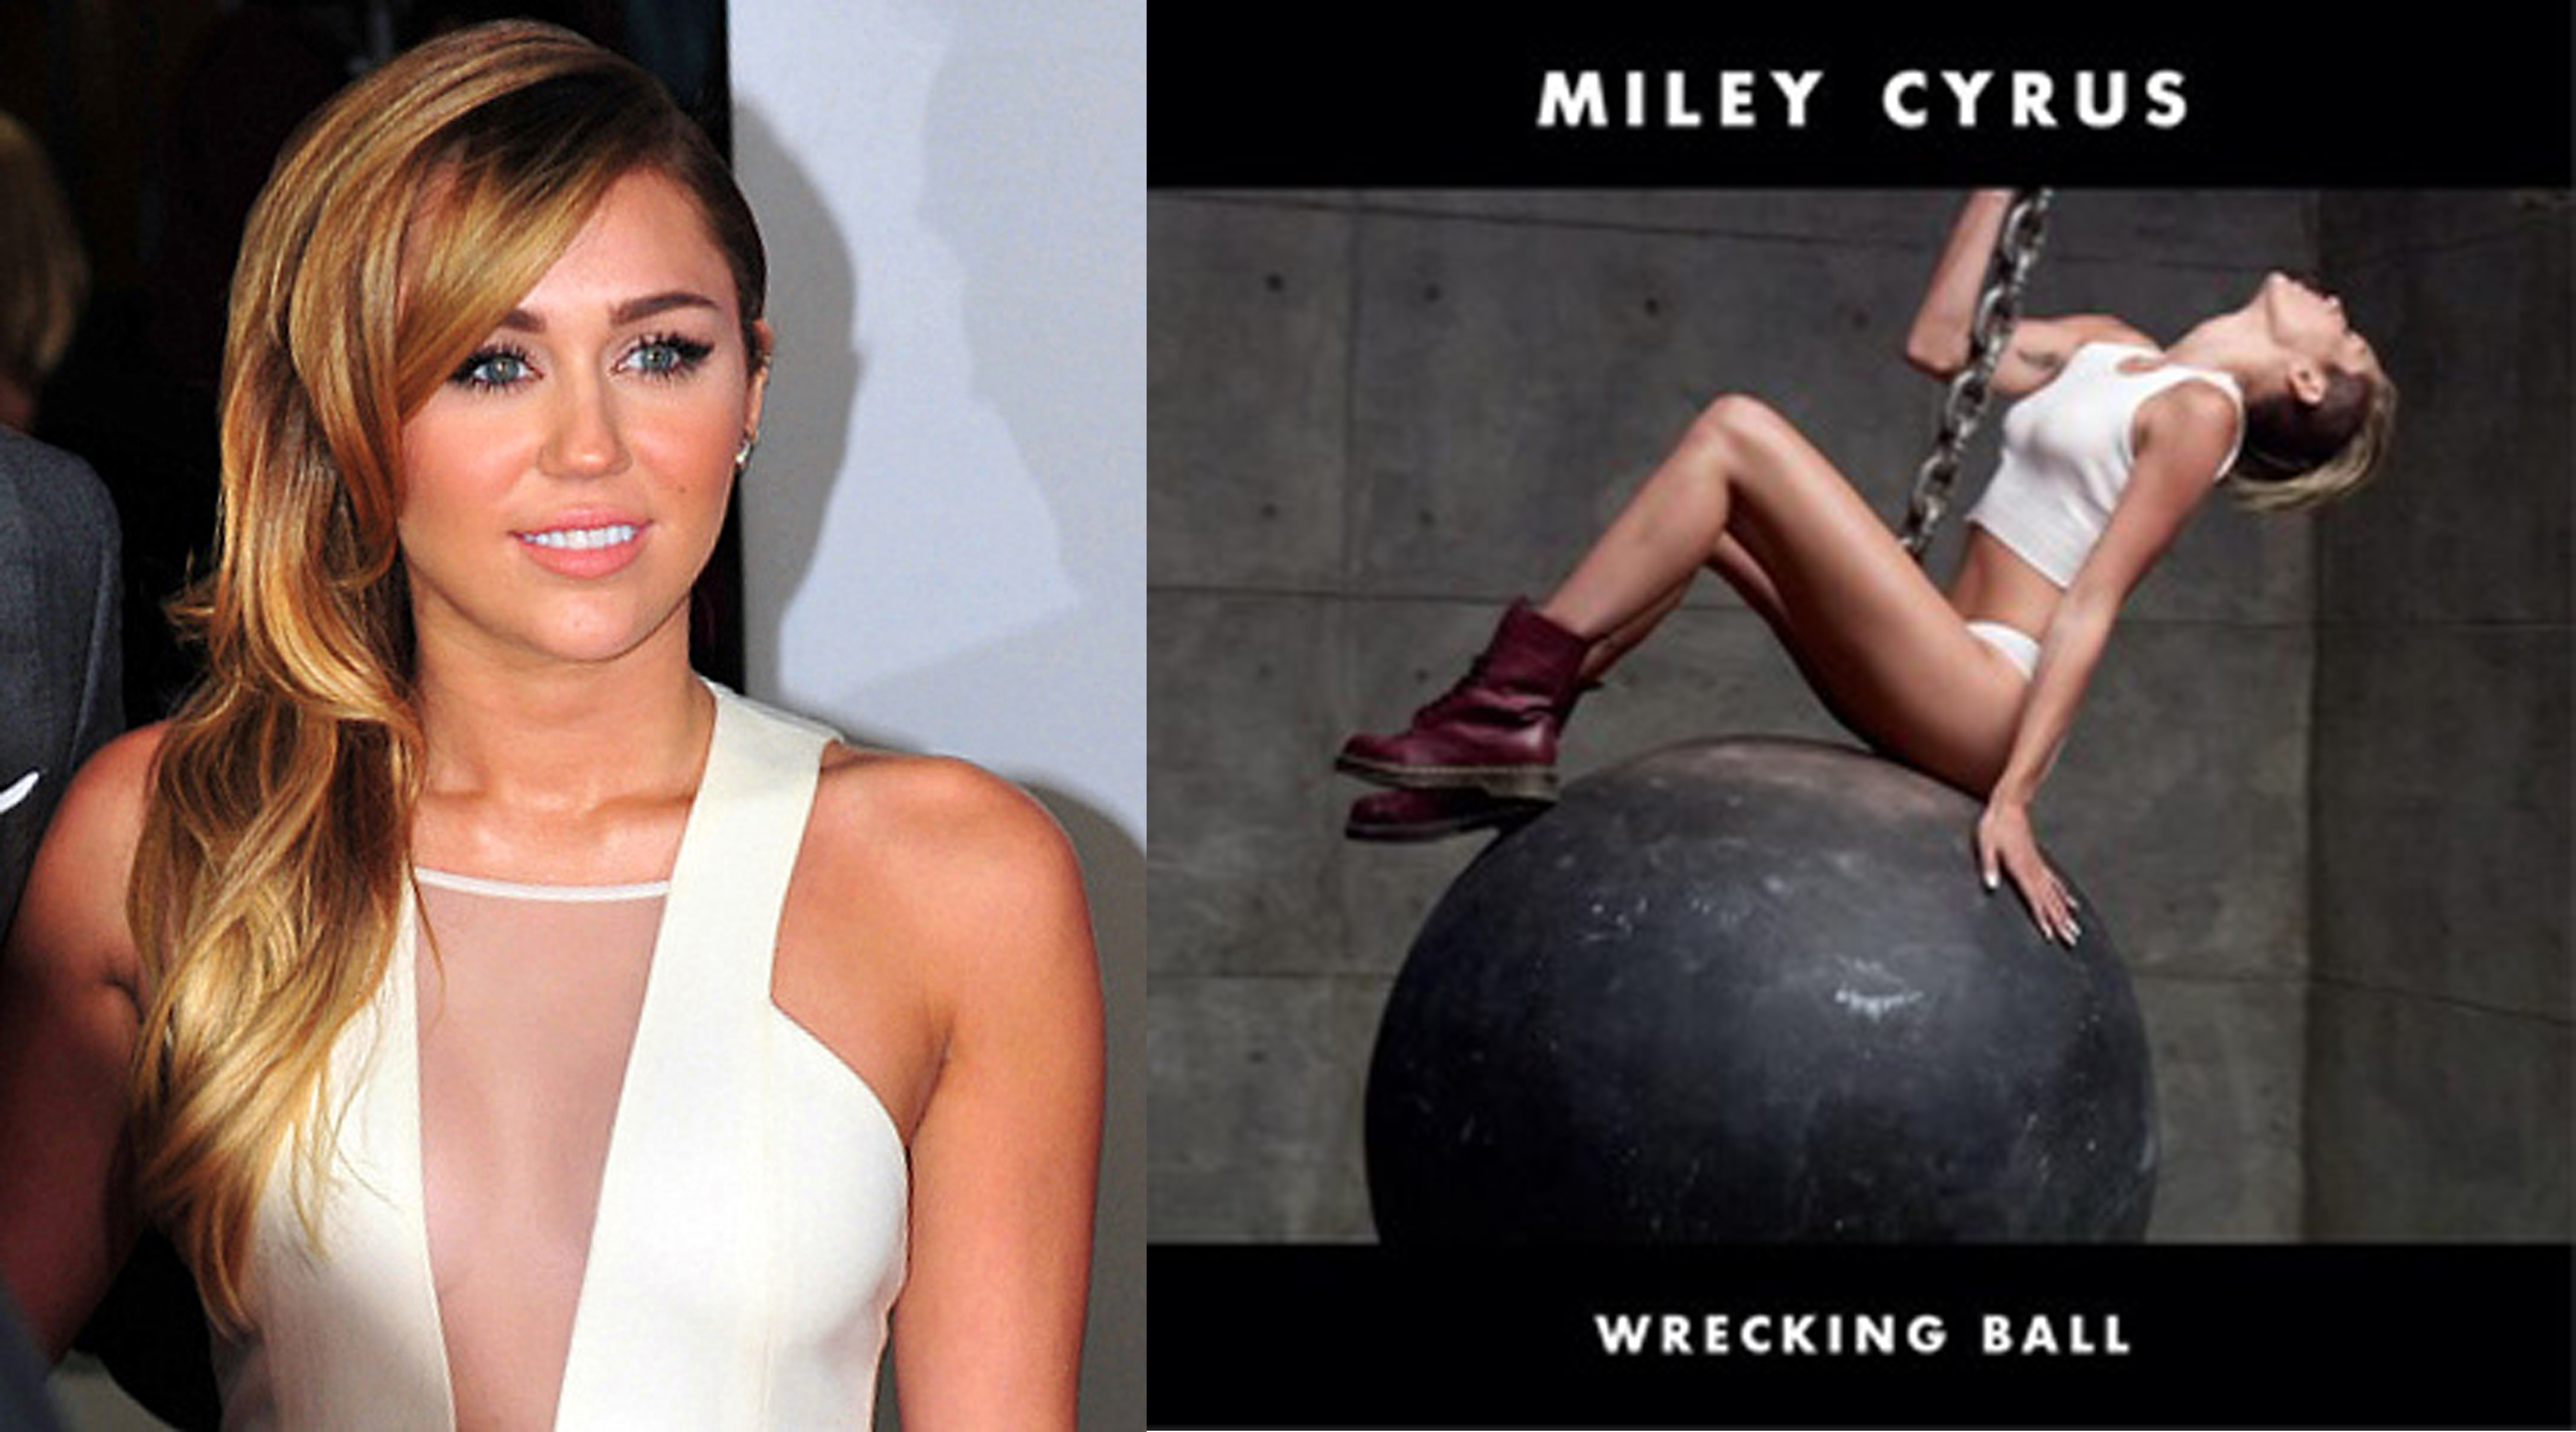 What happened to Miley?